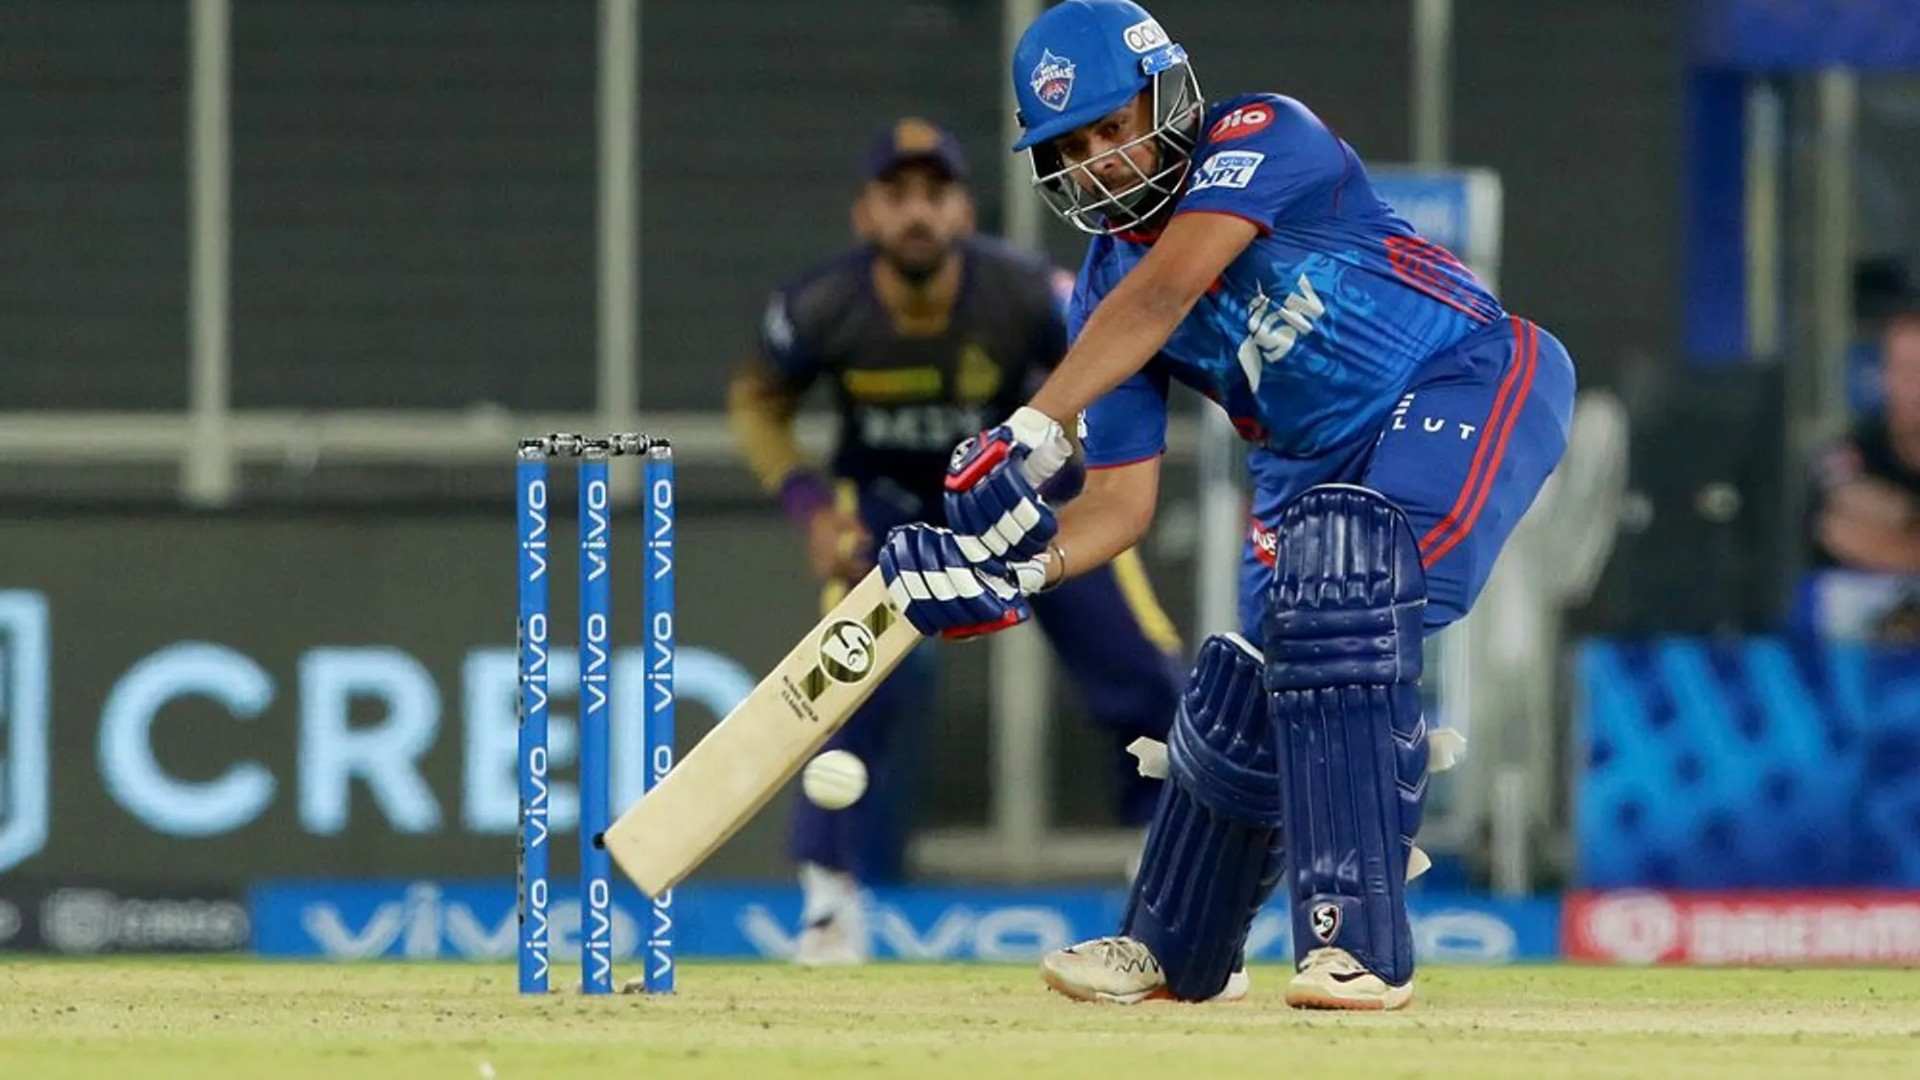 IPL 2021 Prithvi Shaw can be unstoppable on his day. (Image Credit: Twitter/@DelhiCapitals)